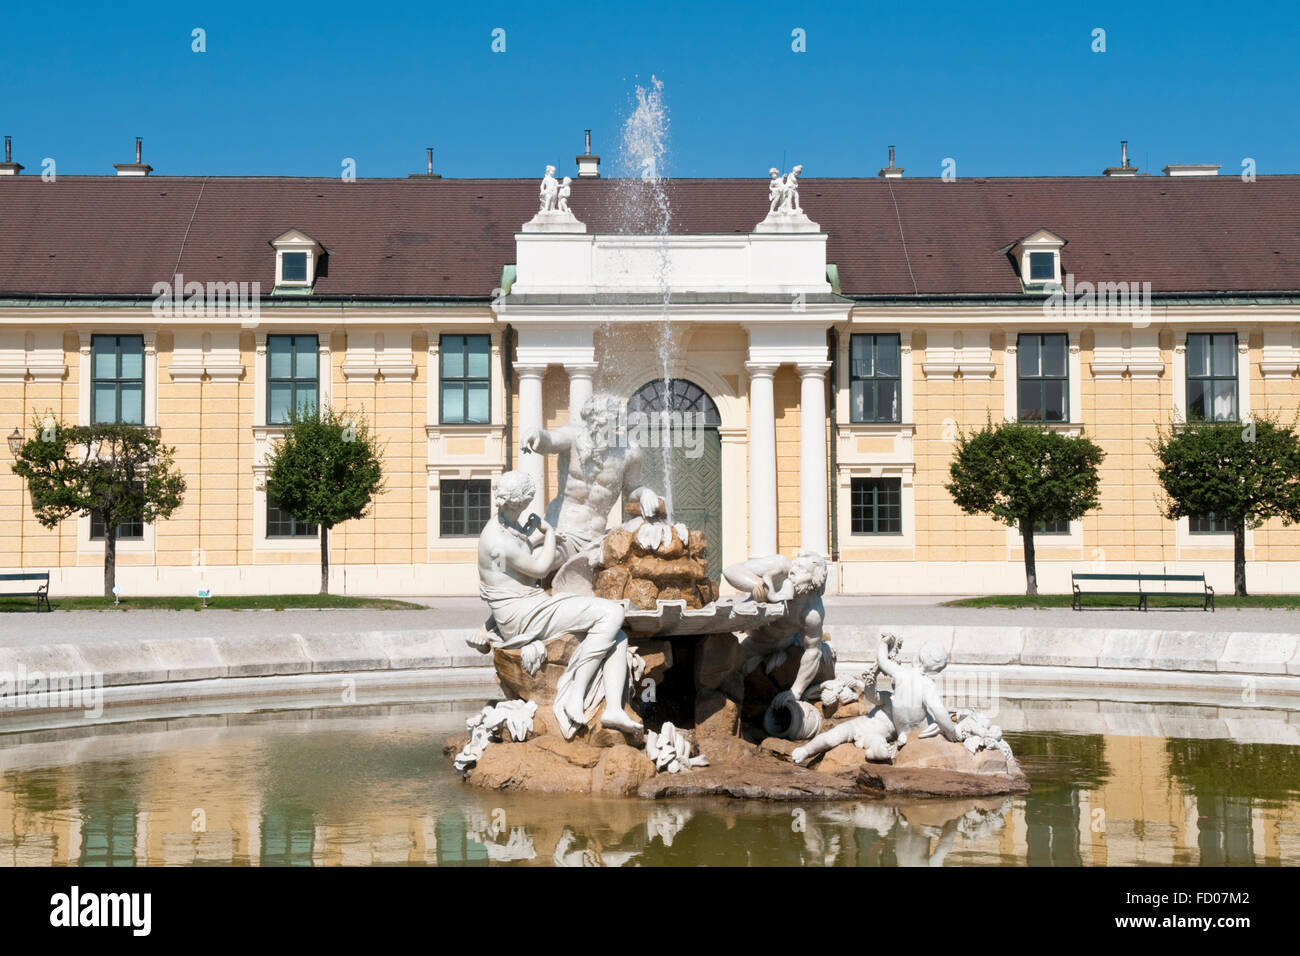 Fountain with statues representing the rivers Danube, Inn, and Enns at the Schonbrunn Palace in Vienna, Ausria Stock Photo